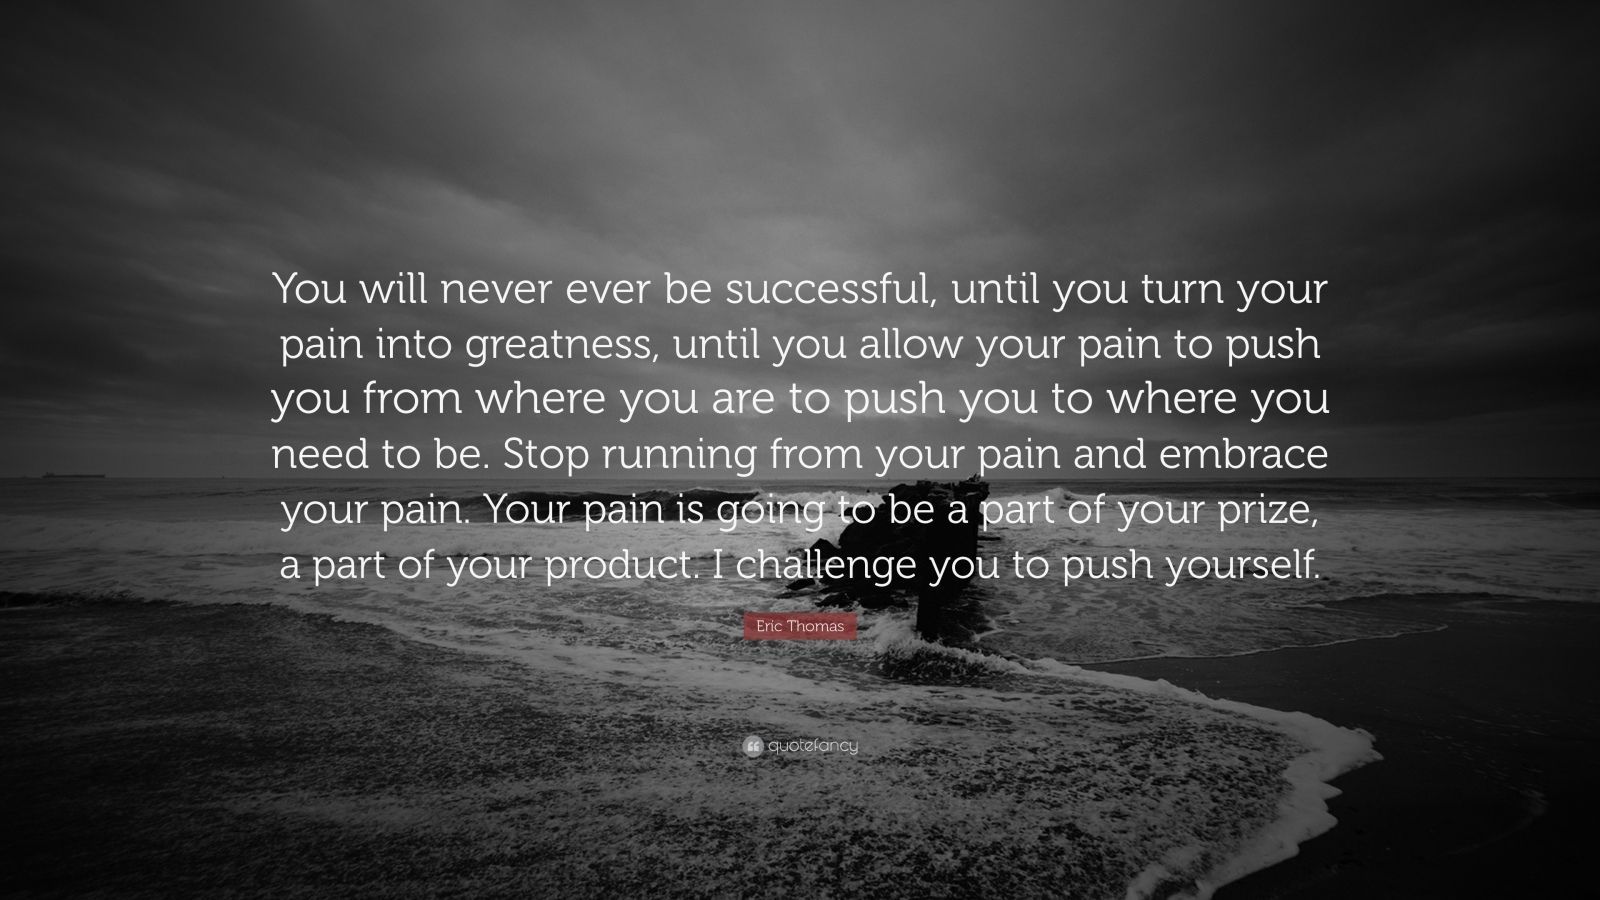 Eric Thomas Quote: “You will never ever be successful, until you turn your pain into greatness, until you allow your pain to push you from w.” (14 wallpaper)